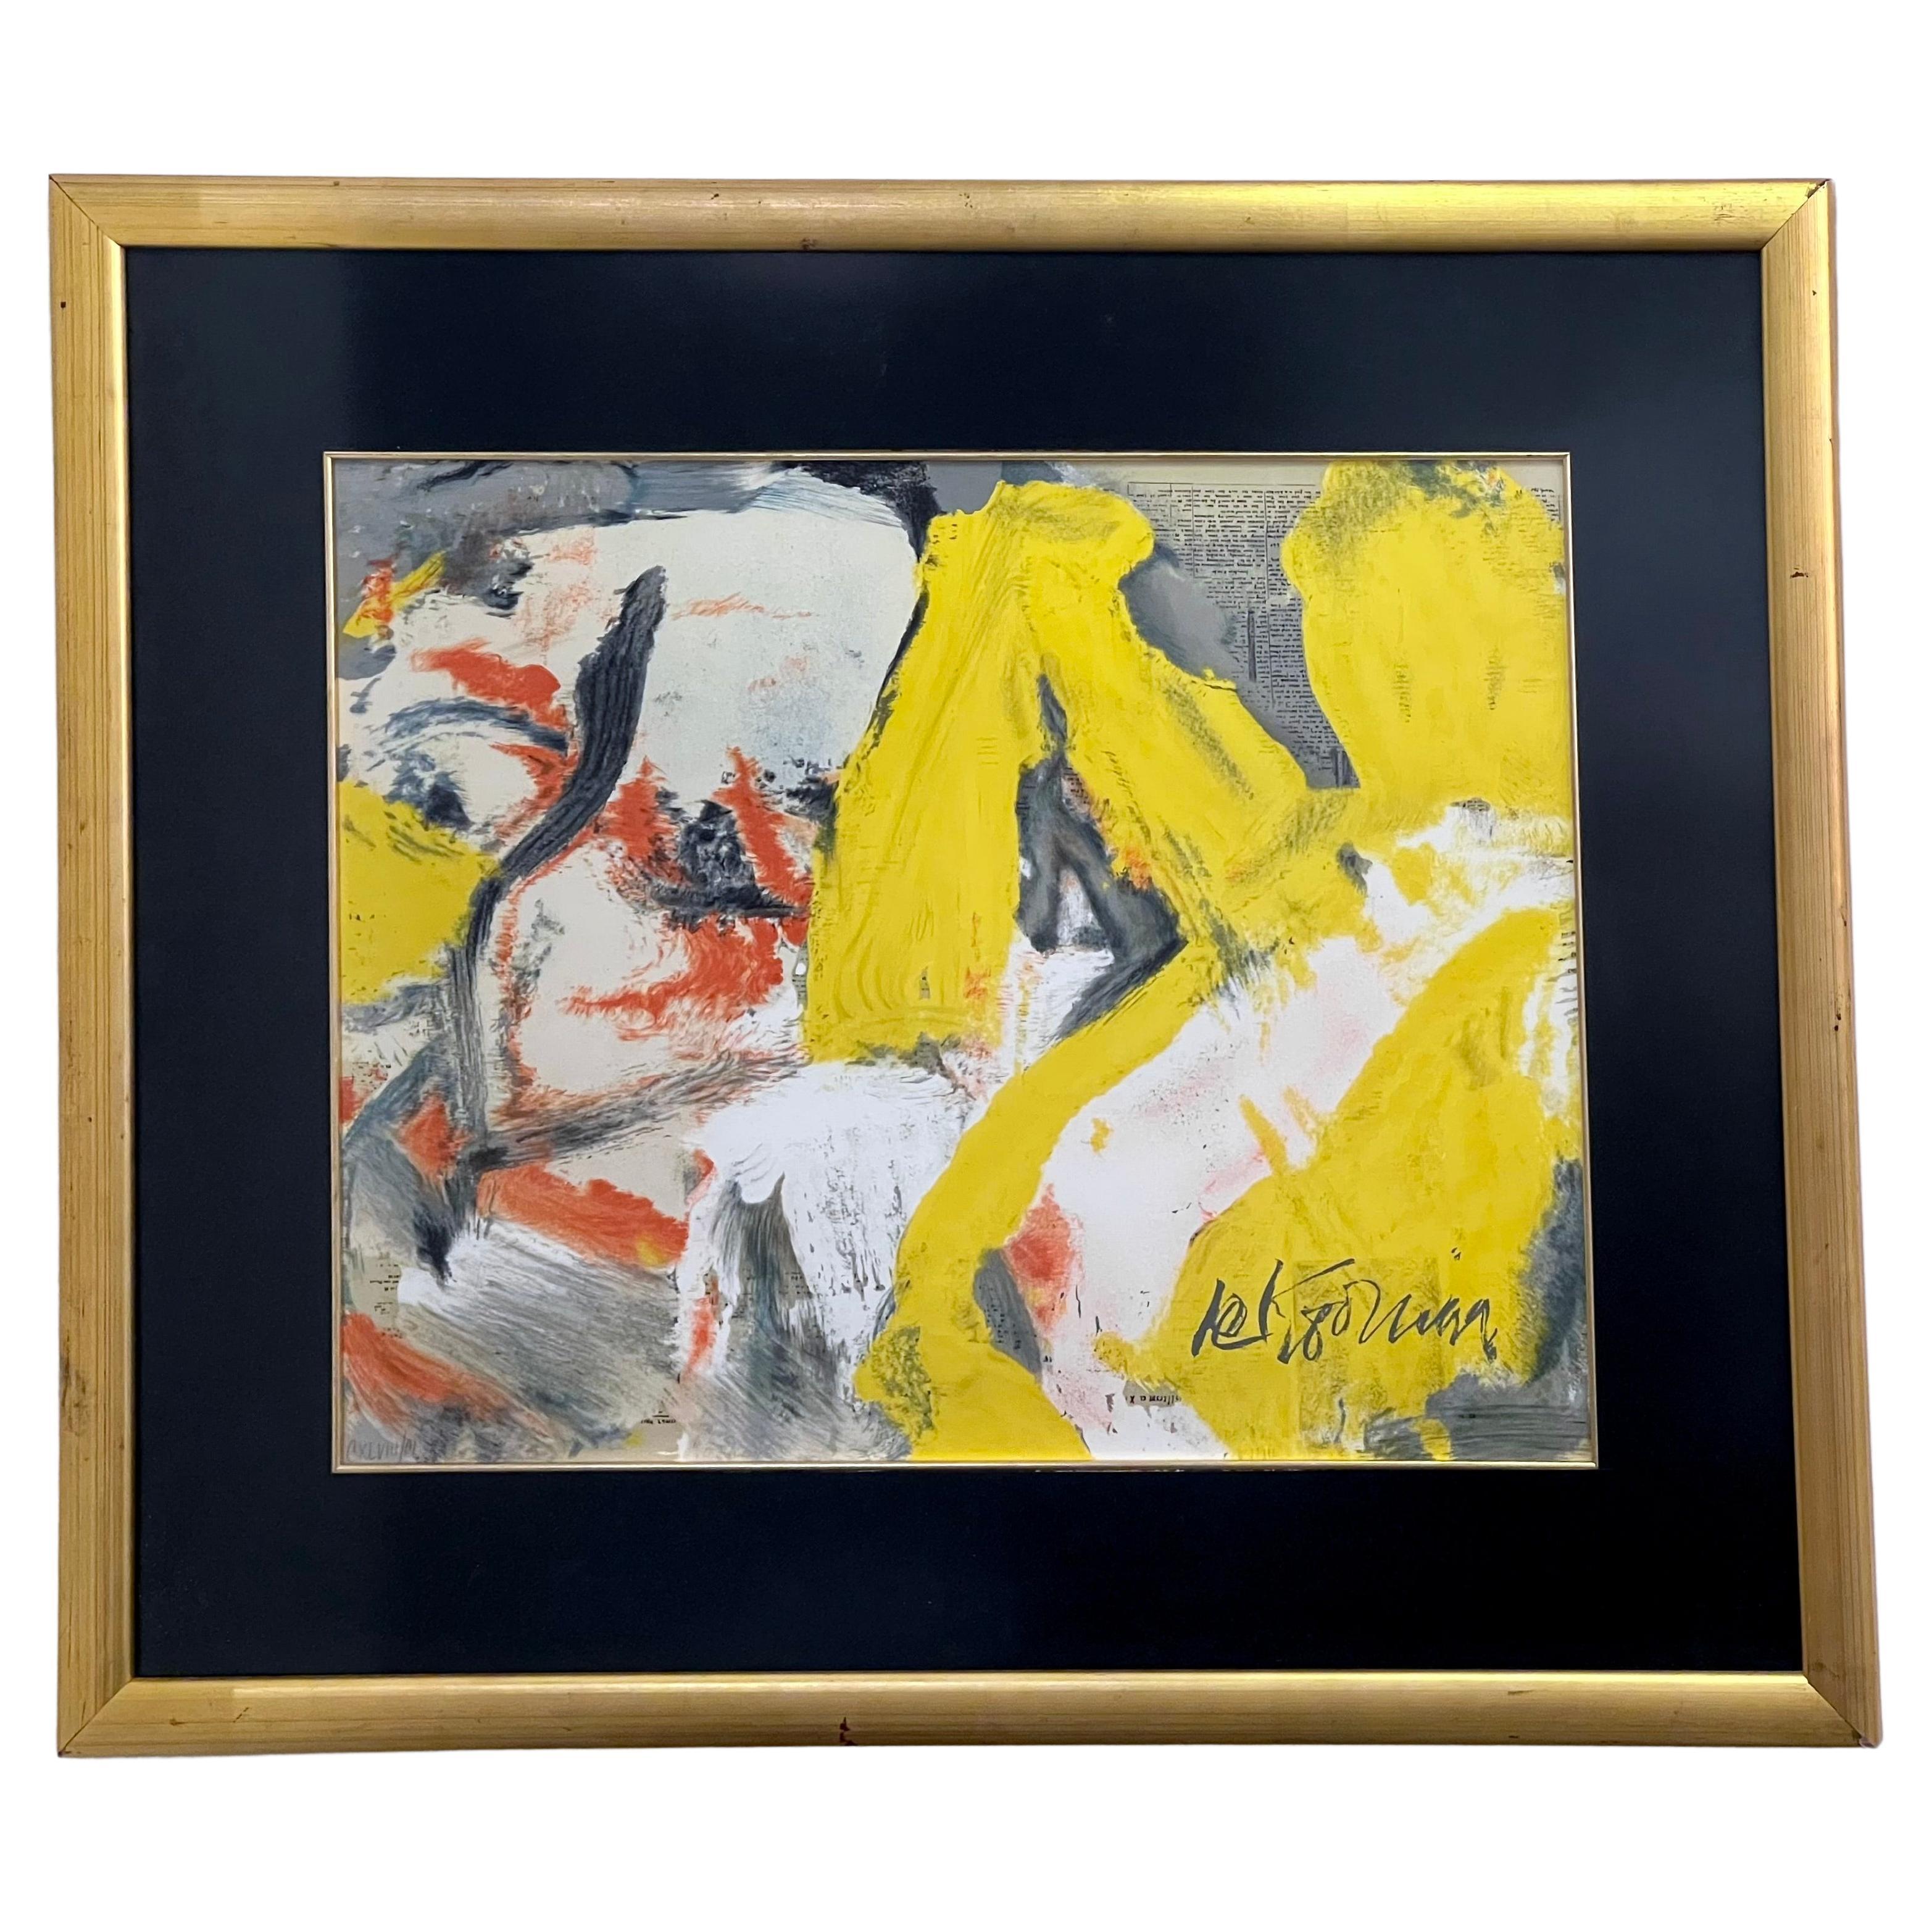 "the Man and the Big Blonde" by Willem de Kooning